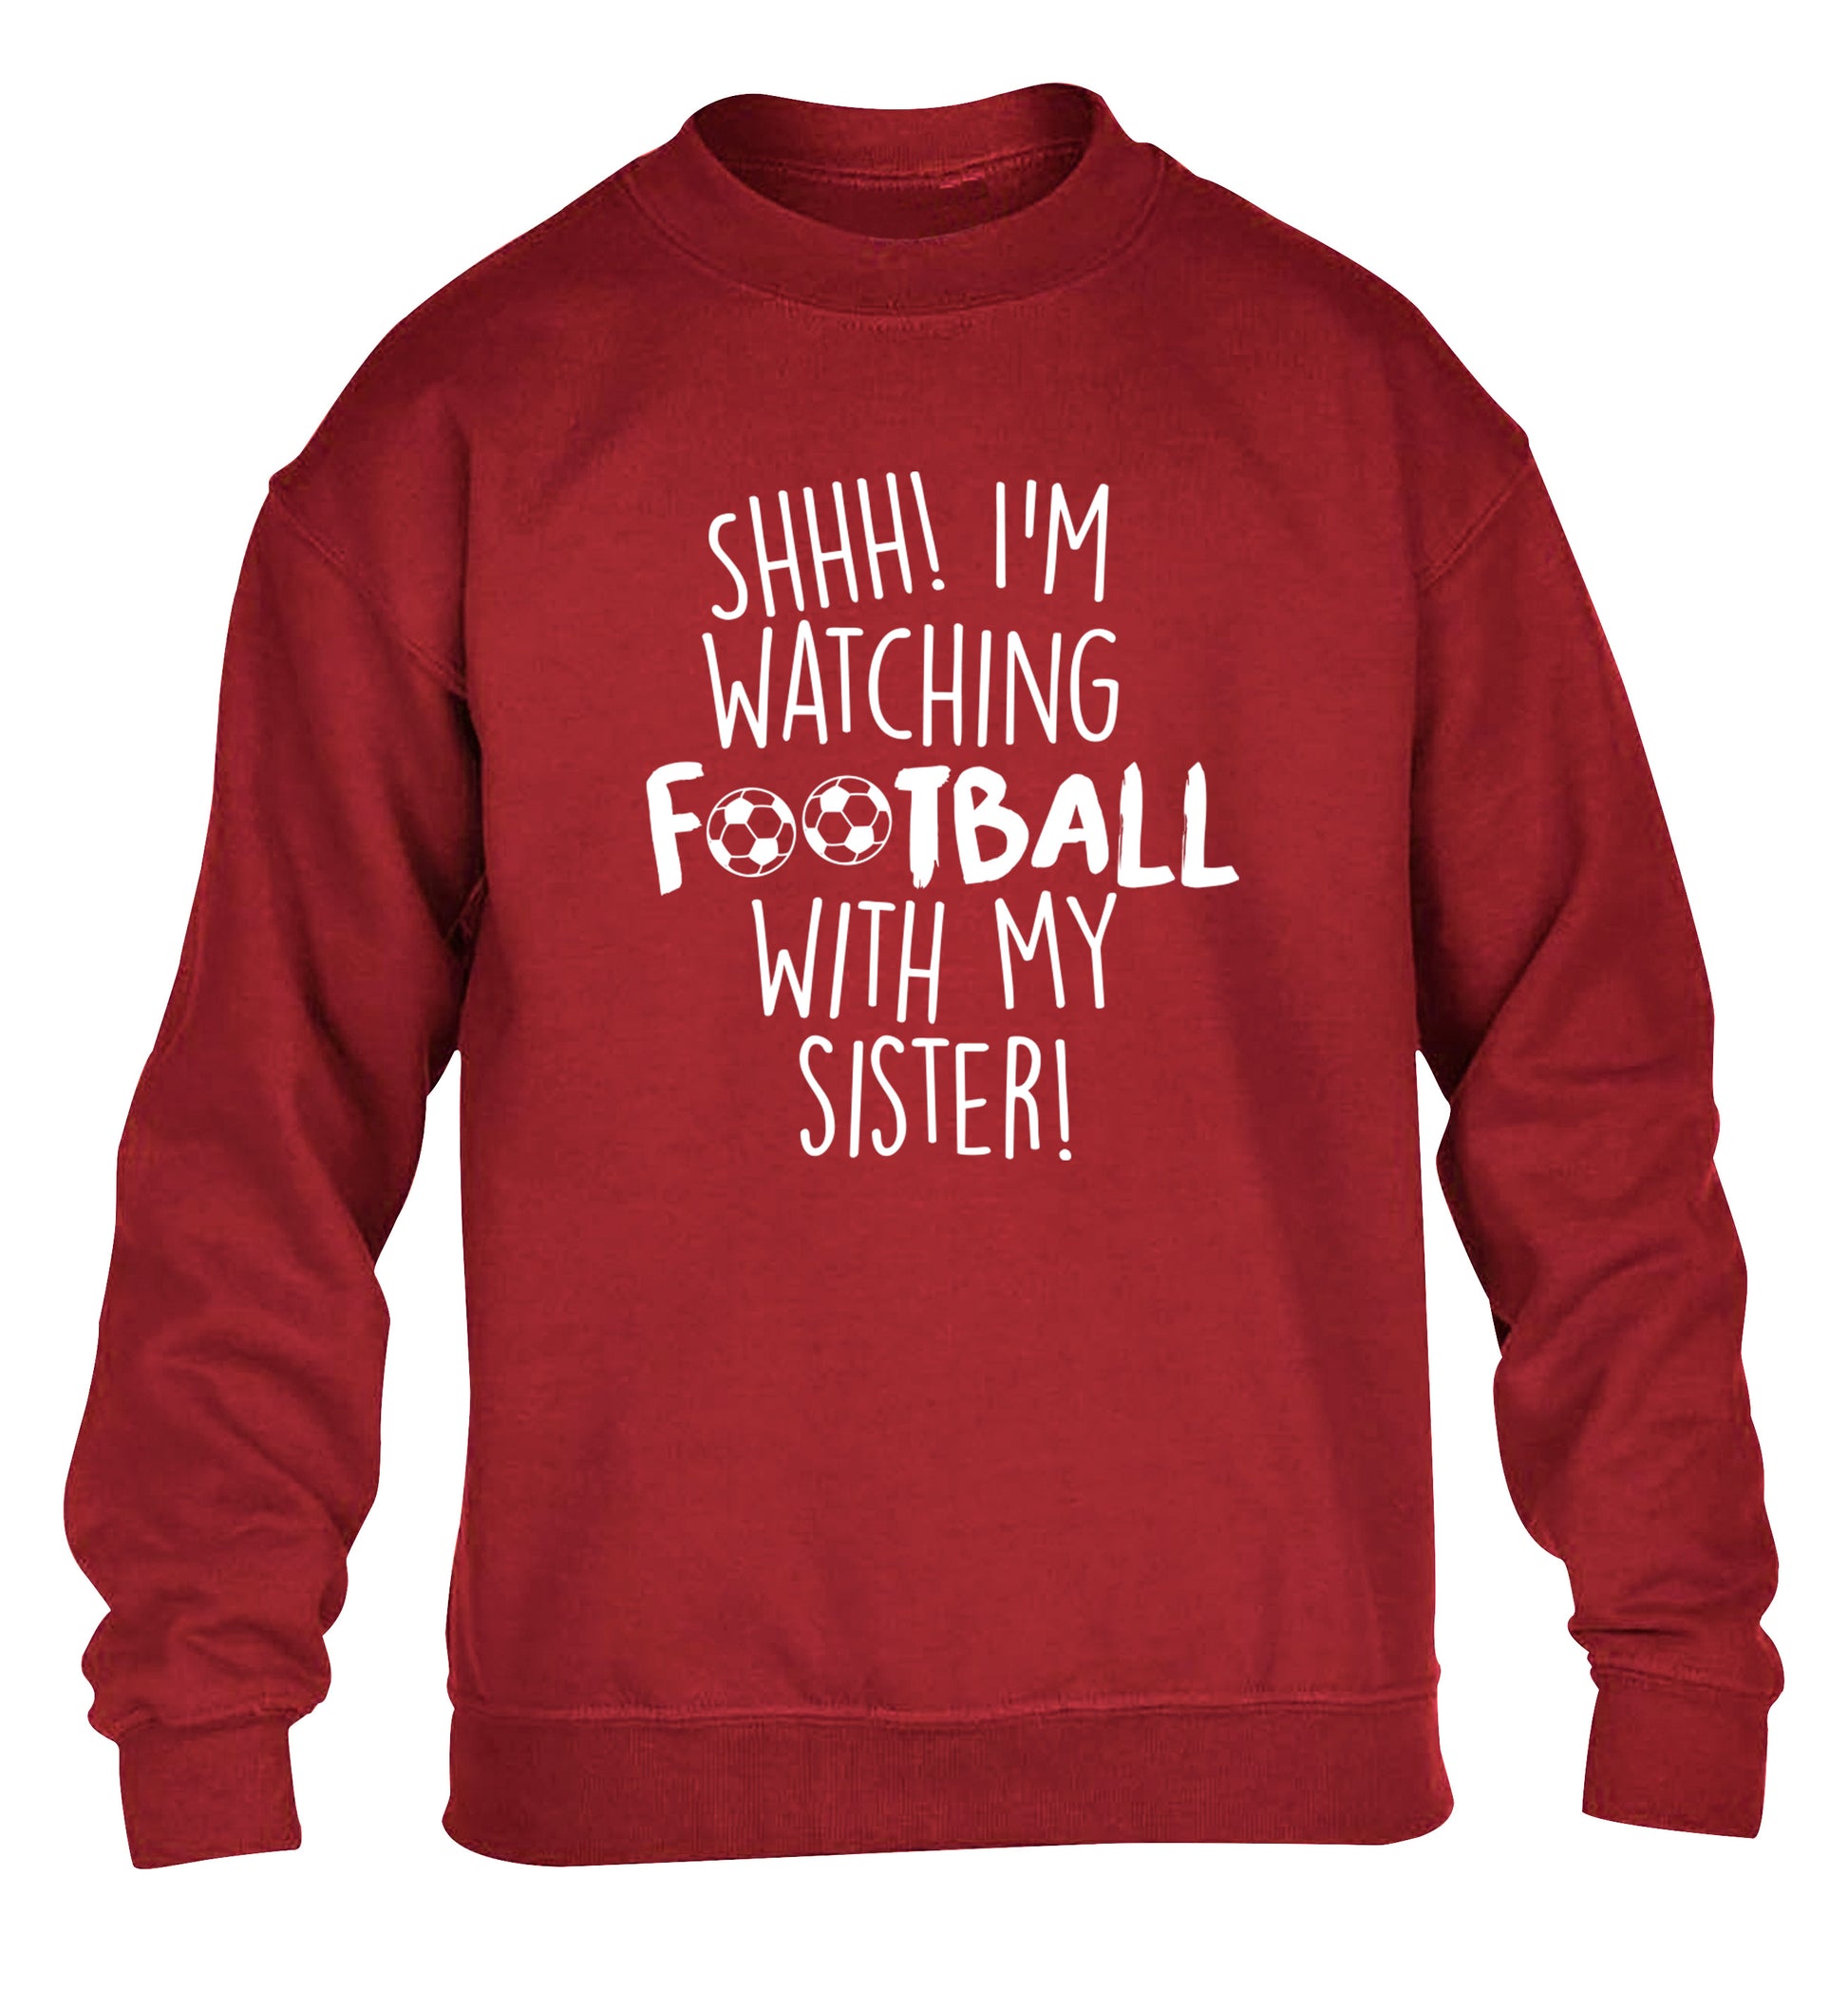 Shhh I'm watching football with my sister children's grey sweater 12-14 Years